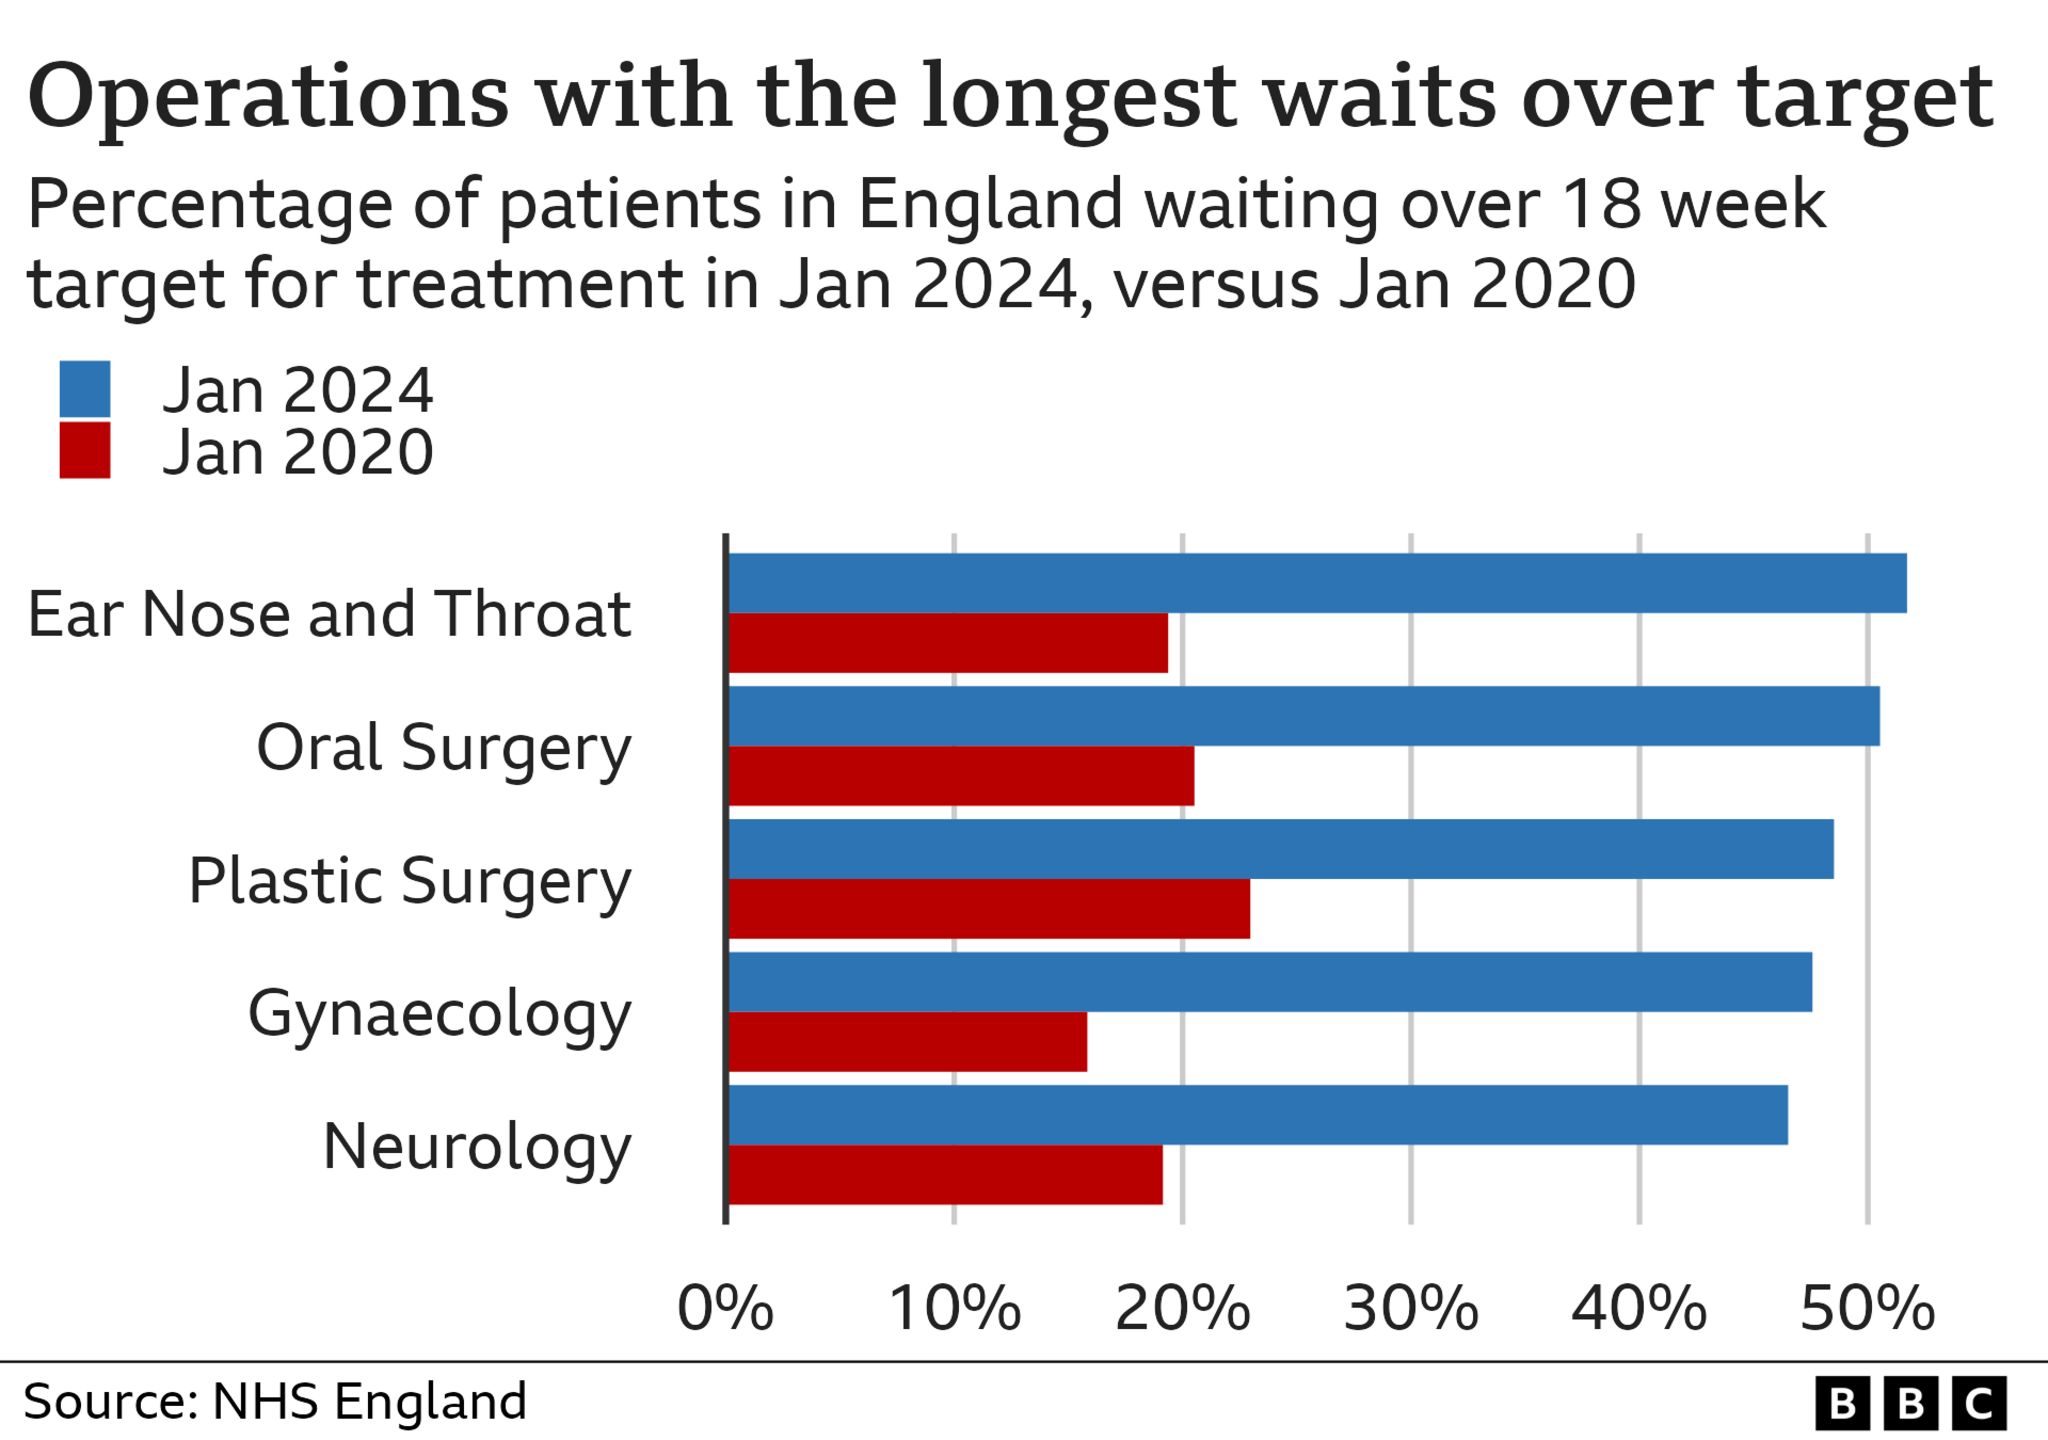 Chart show the share of patients waiting over the 18 week target time by speciality in January 2024 compared with January 2020. Ear nose and throat has the highest share at 51%, which is significantly higher than the percentage in January 2020, which was about 20%.